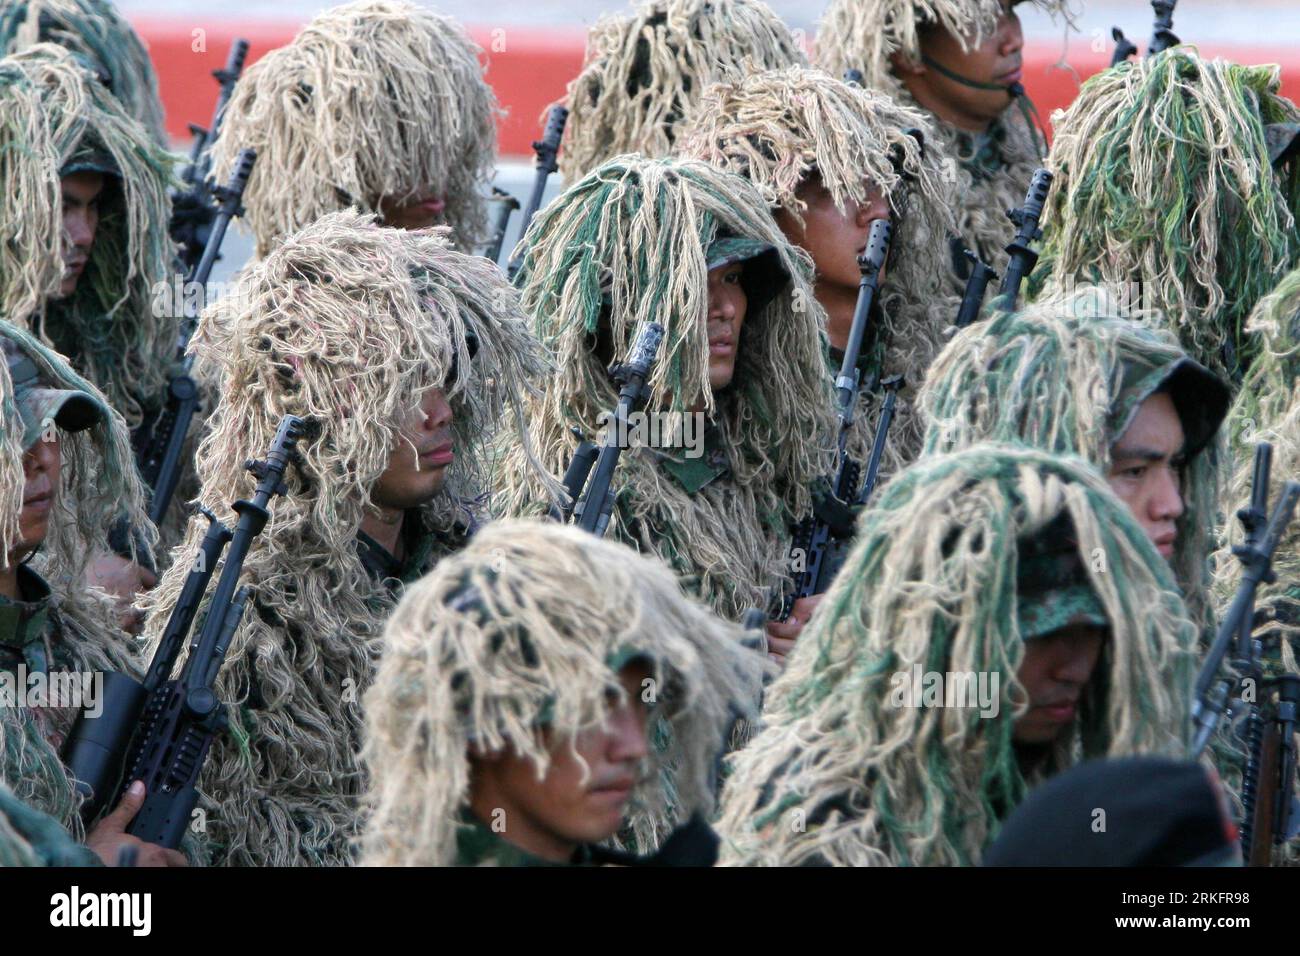 Bildnummer: 55449371  Datum: 12.06.2011  Copyright: imago/Xinhua (110612) -- MANILA, June 12, 2011 (Xinhua) --Camouflaged snipers from the Philippine National Police Special Action Force (PNP-SAF) march during a parade celebrating the Philippine Independence Day in Manila, the Philippines, on June 12, 2011. The Philippines celebrated on Sunday the 113th anniversary of the proclamation of independence from Spanish rule.(Xinhua/Rouelle Umali) (cl) PHILIPPINES-PARADE CELEBRATING PHILIPPINE INDEPENDENCE PUBLICATIONxNOTxINxCHN Gesellschaft Politik Manila Unabhängigkeitstag xcb x0x 2011 quer     Bil Stock Photo